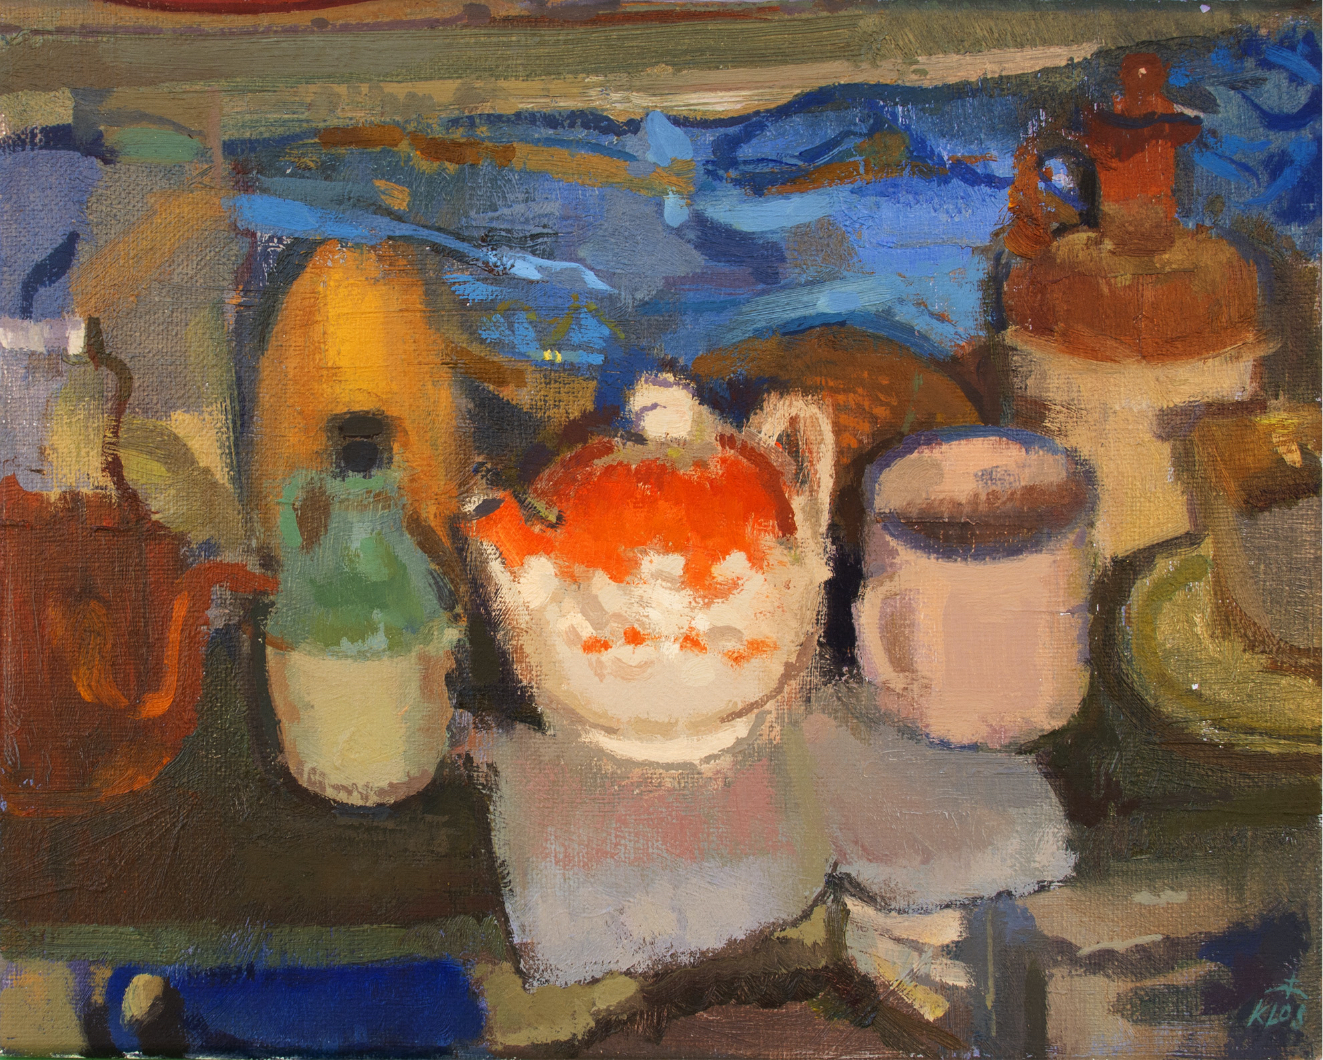 Tea Kettle on Shelves / oil on panel / 20" x 24" / 2020 / Private Collection